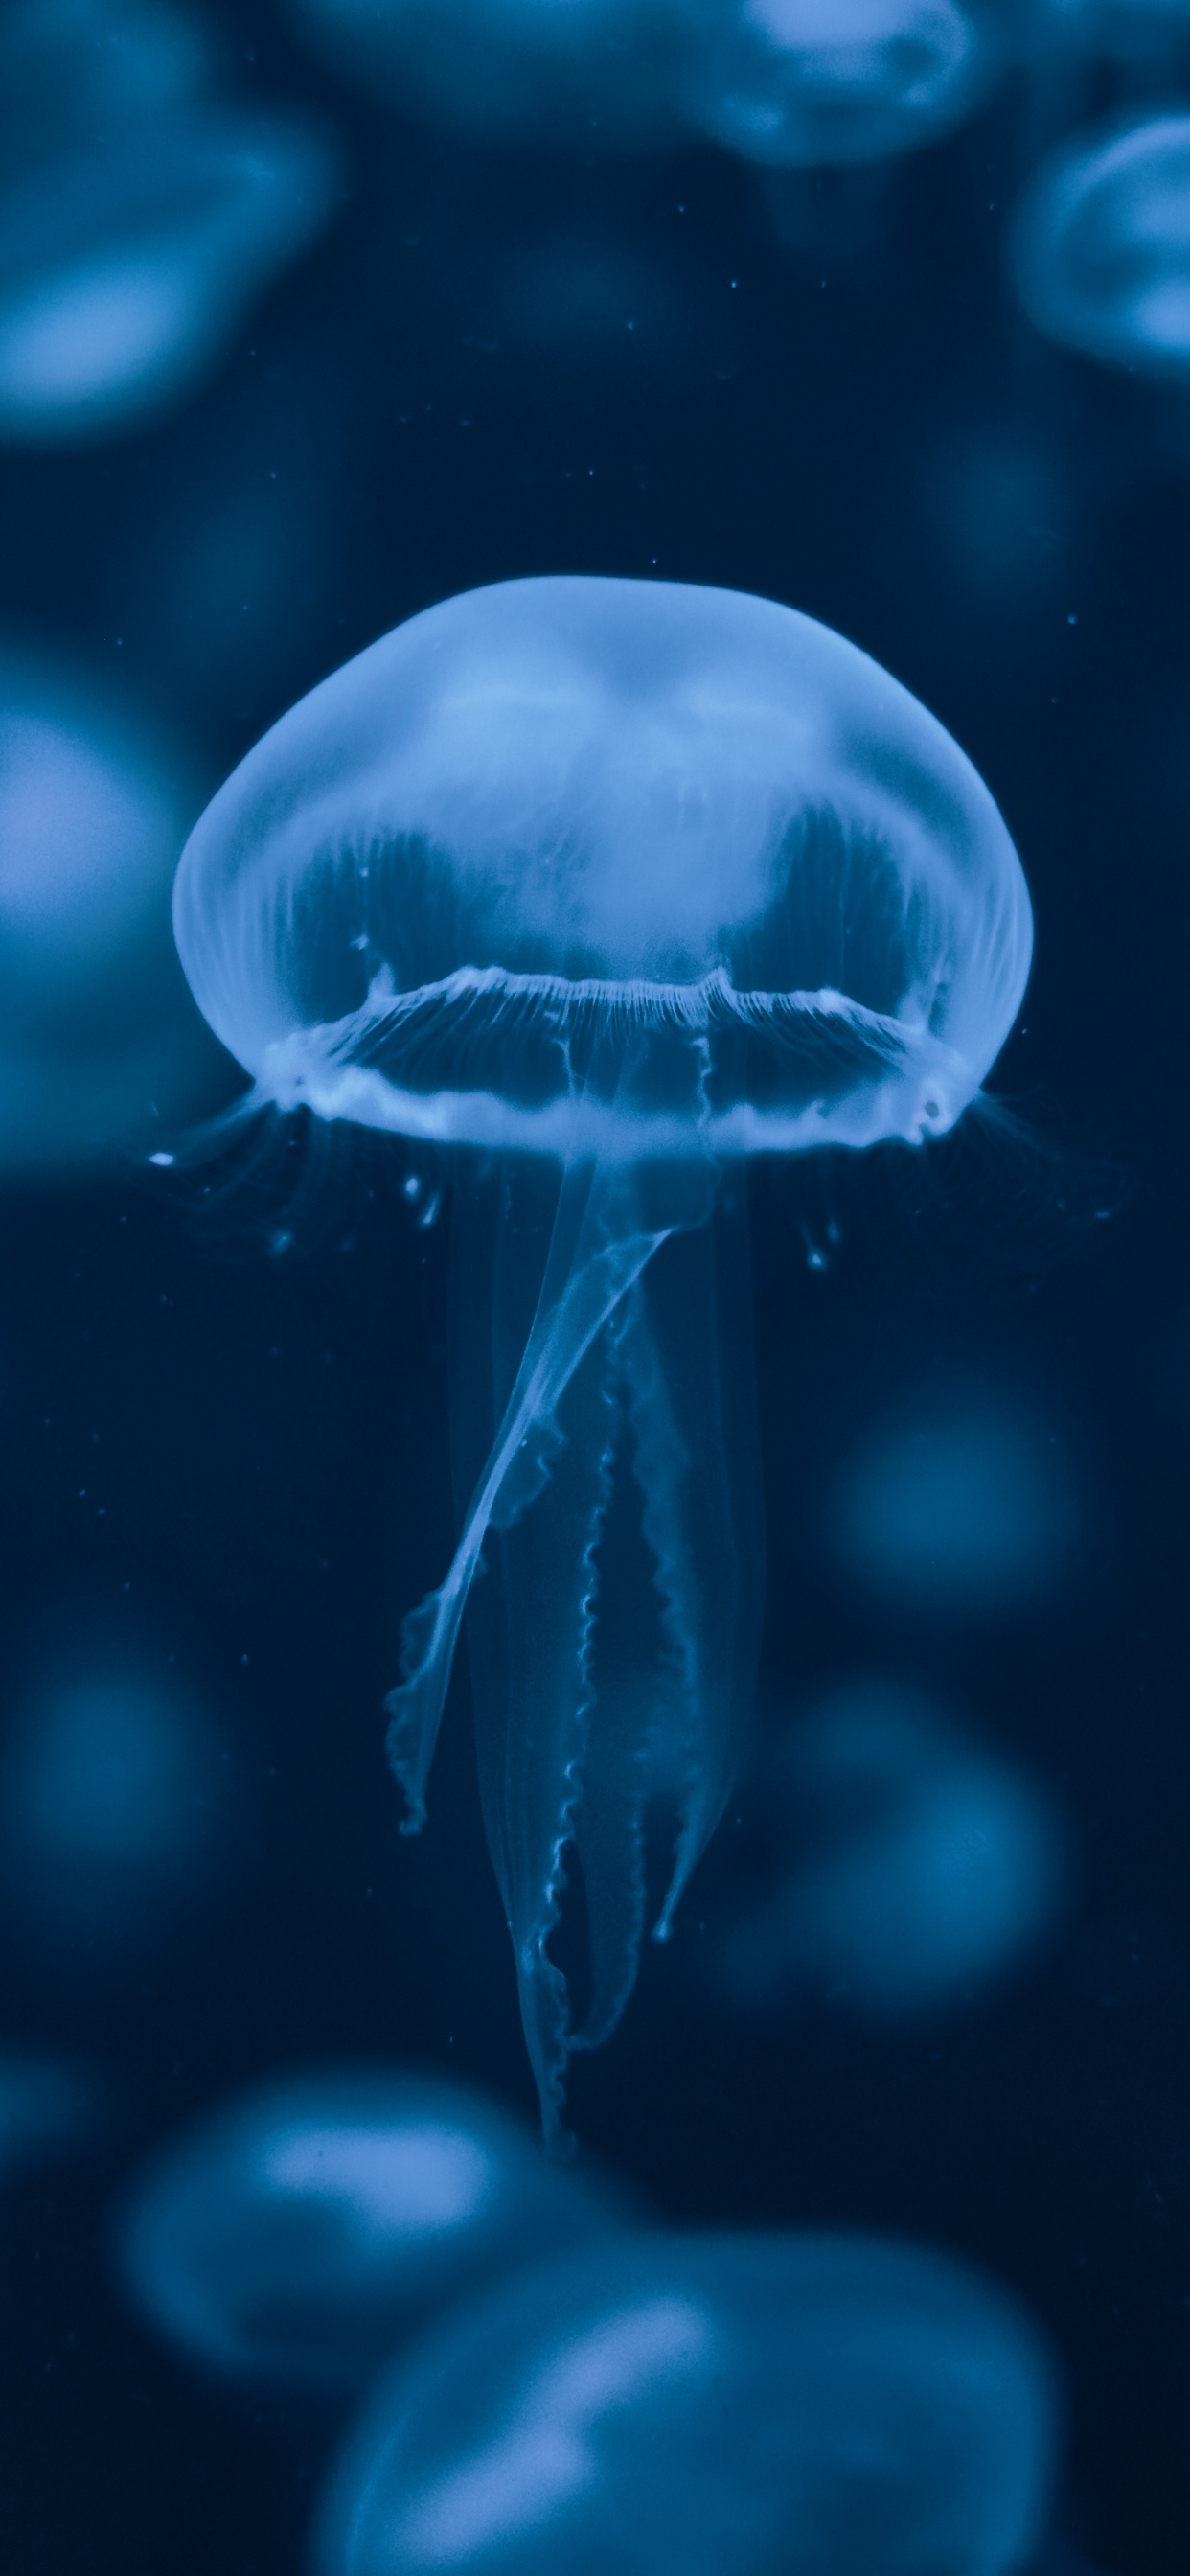 Blue and White Jellyfish Illustration. Wallpaper in 1242x2688 Resolution